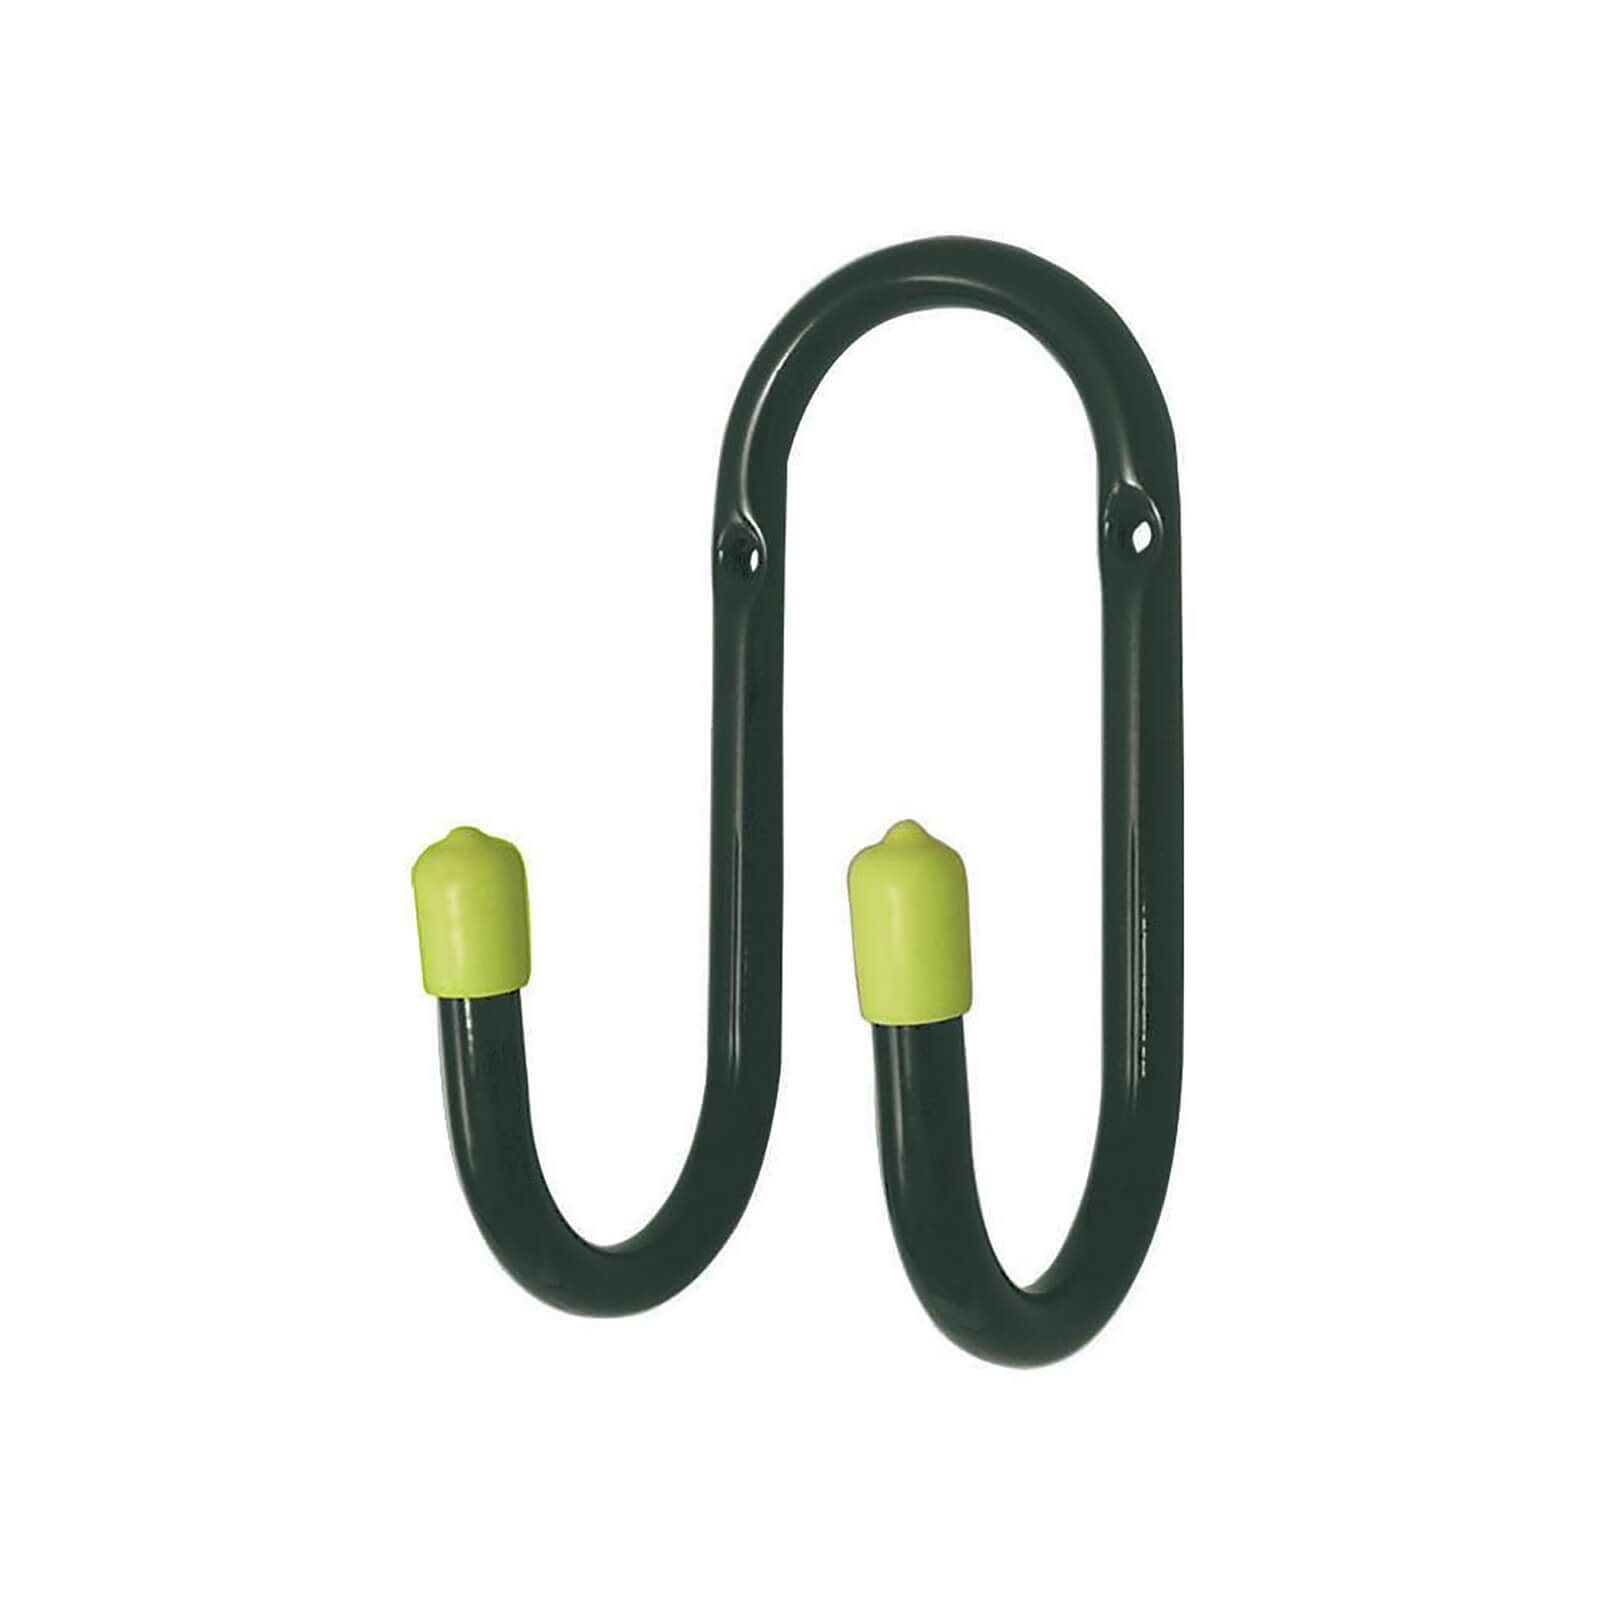 Utility Double Hook - Blue and Green - 70mm - 3 Pack